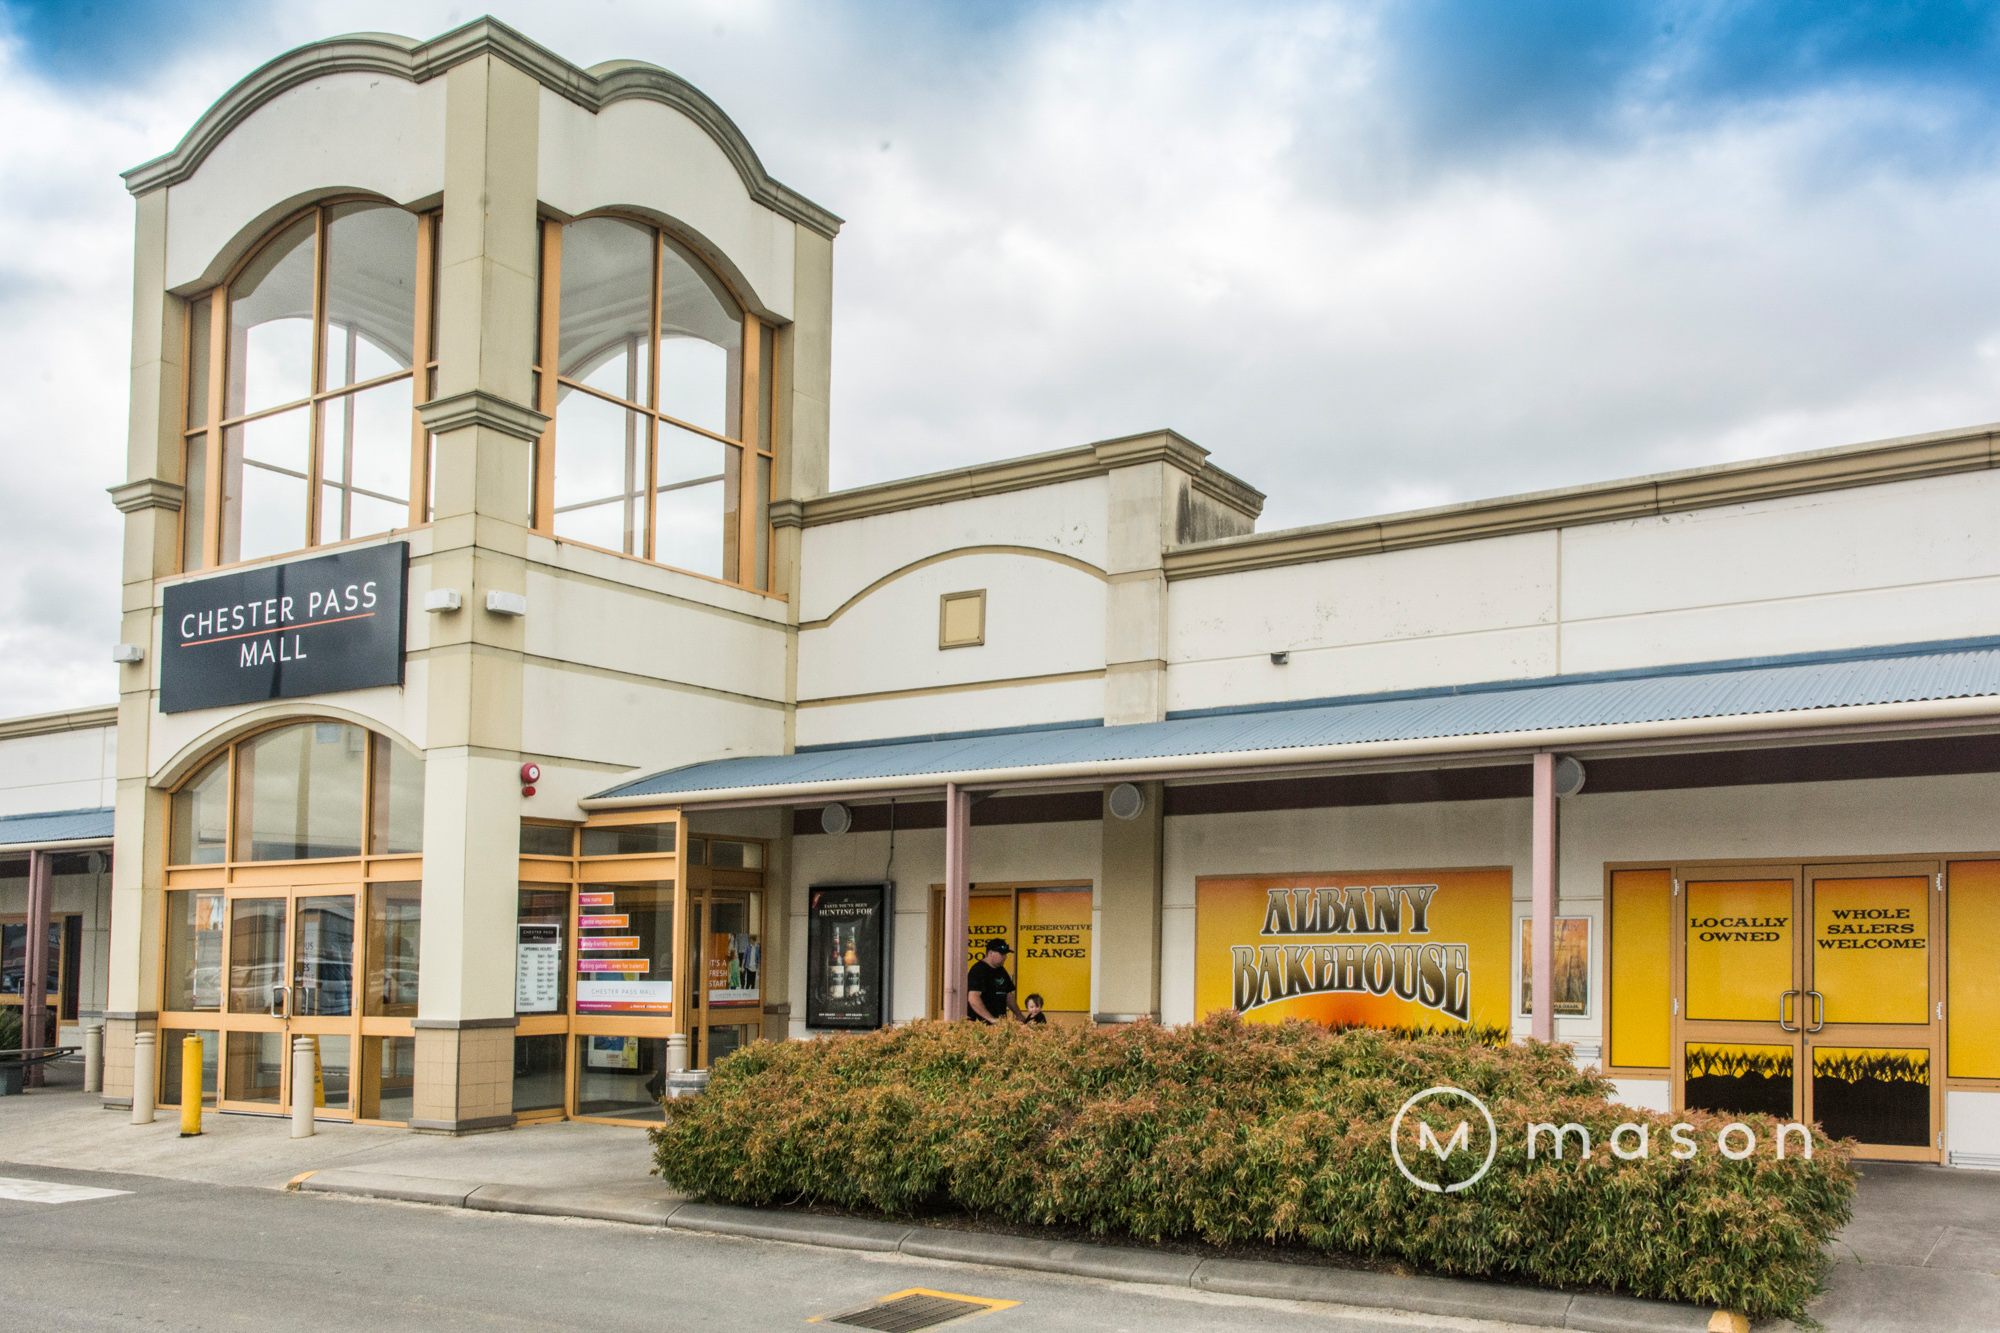 Albany Bakery For Sale - Shopping Centre Location image 2